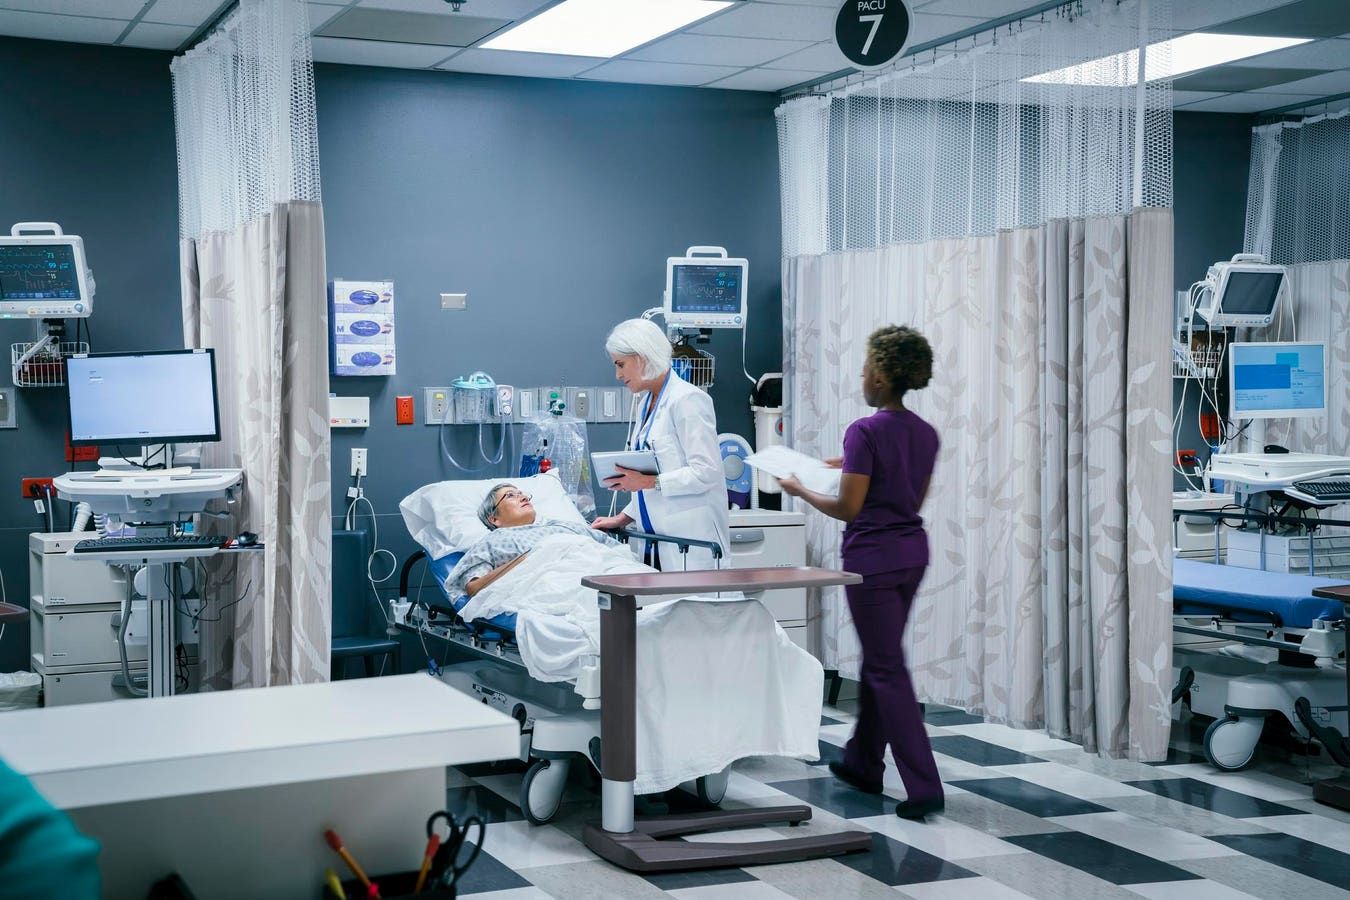 The U.S. Health System Should Focus On Pre-Acute Care, Not …